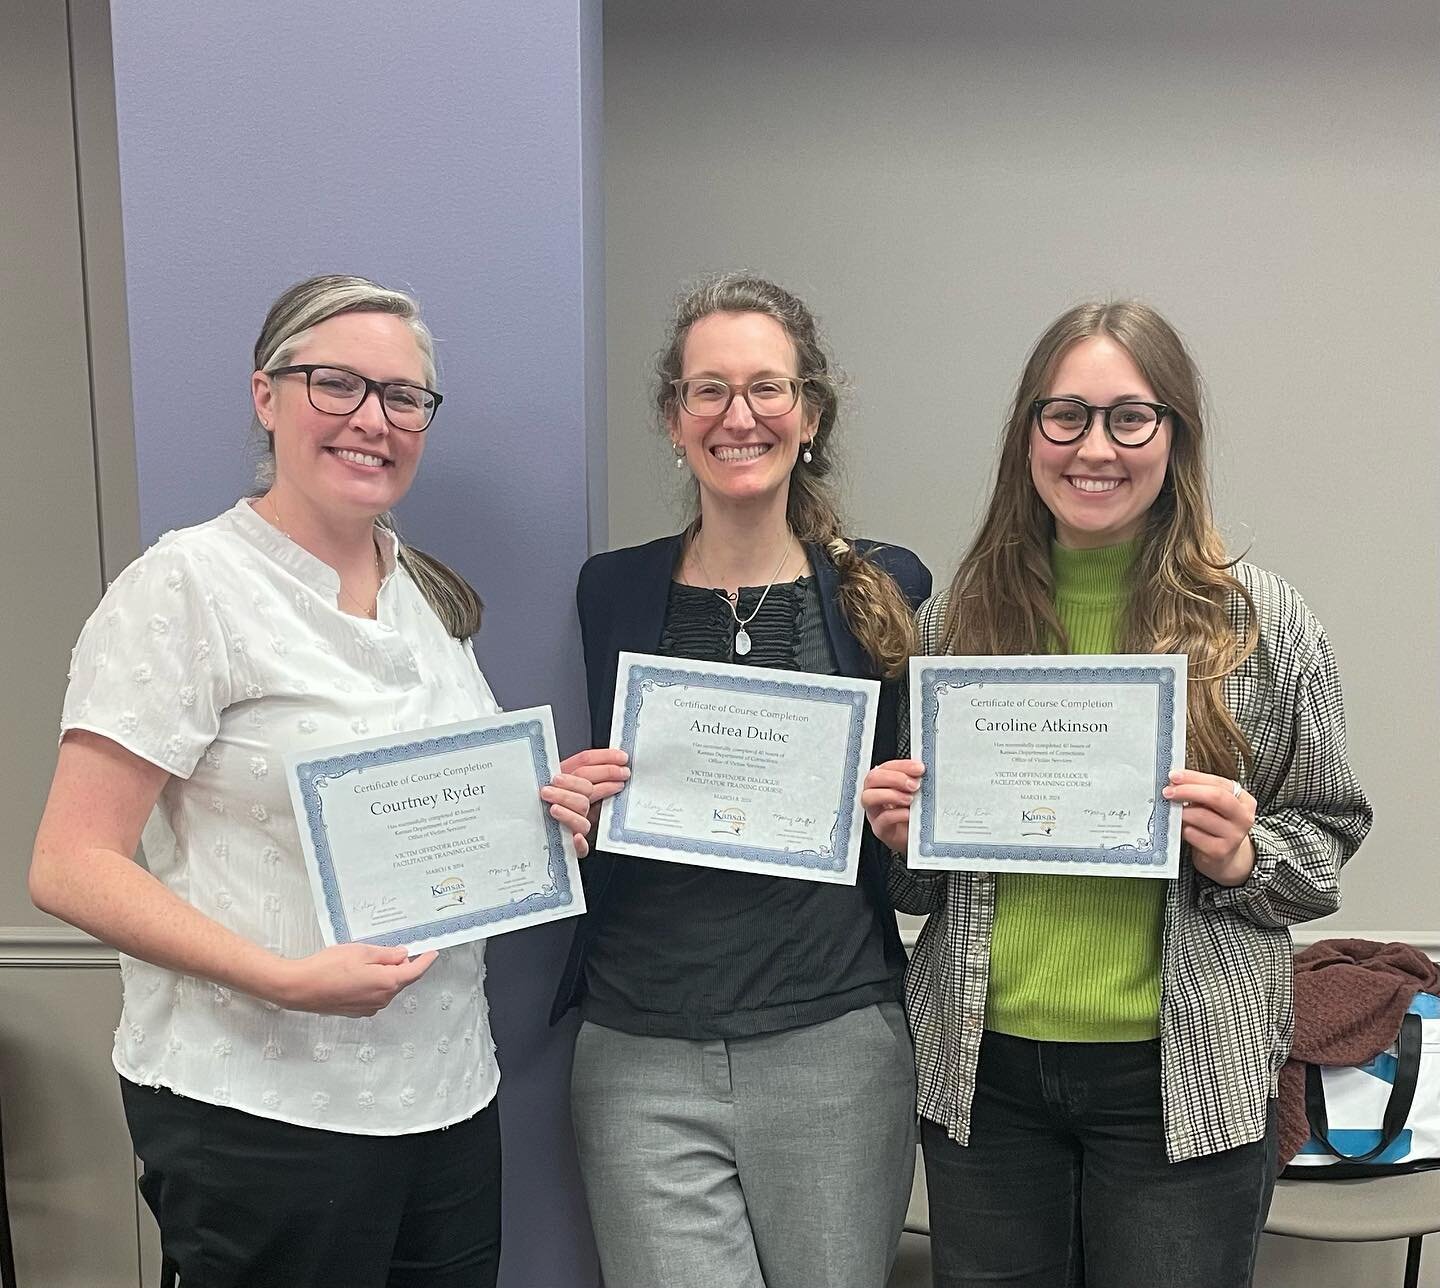 Congrats to Courtney, Andrea, and Caroline on completing a 40 hour Victim-Offender Dialogue Facilitator training! Thank you to the Kansas Department of Corrections for leading the training